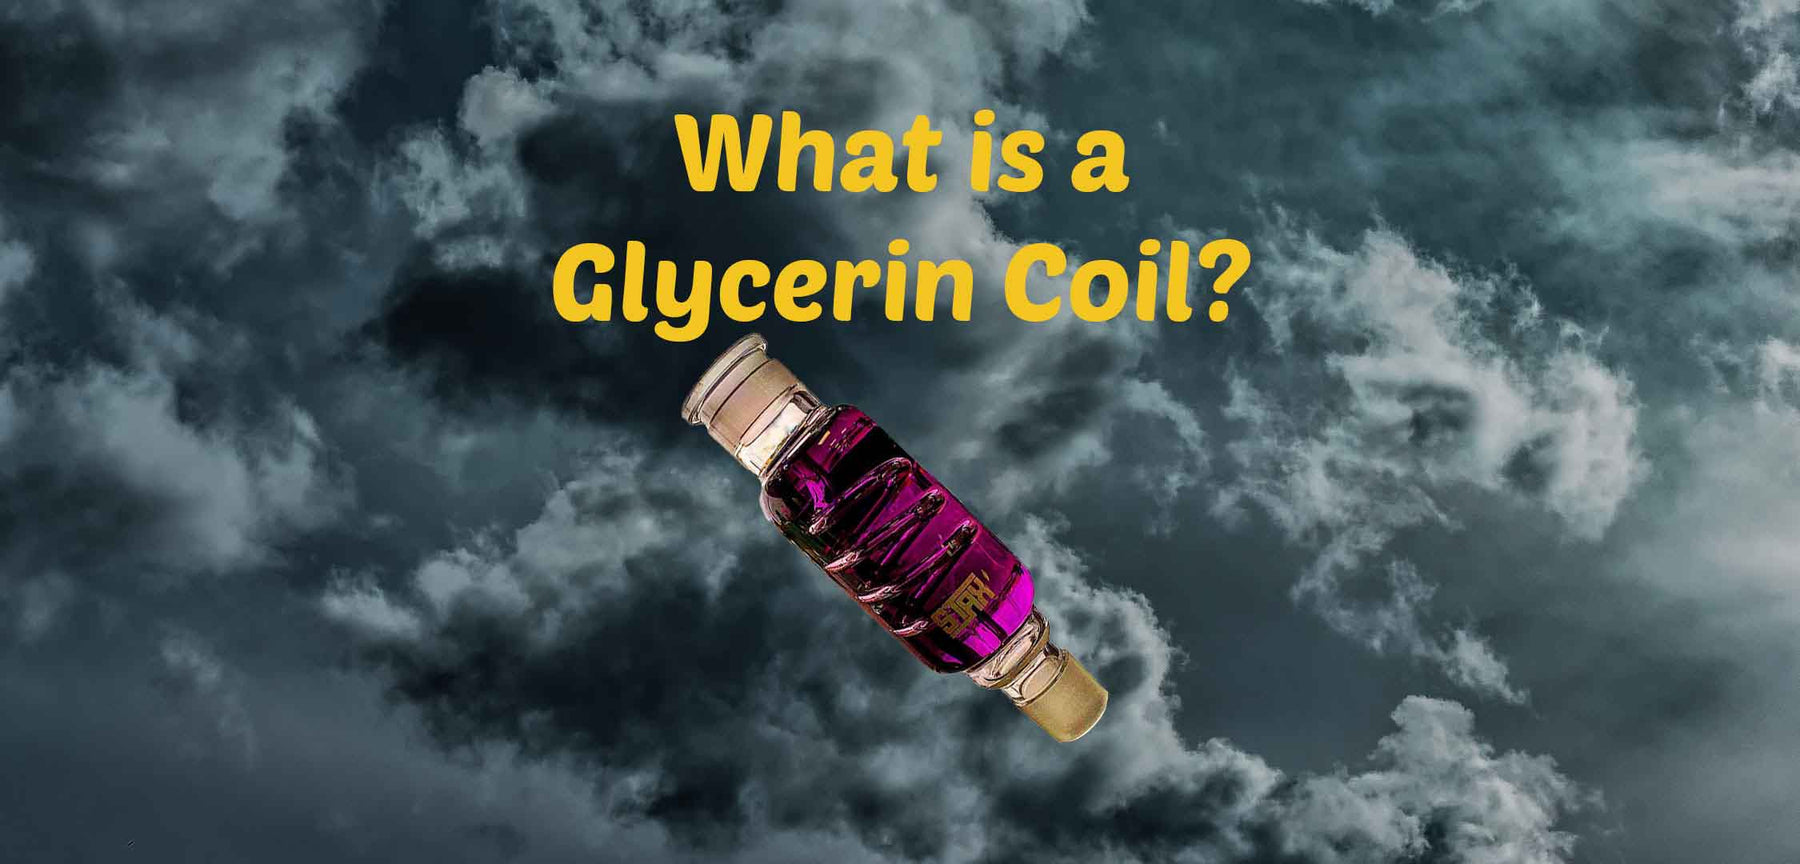 What is a Glycerin Coil?